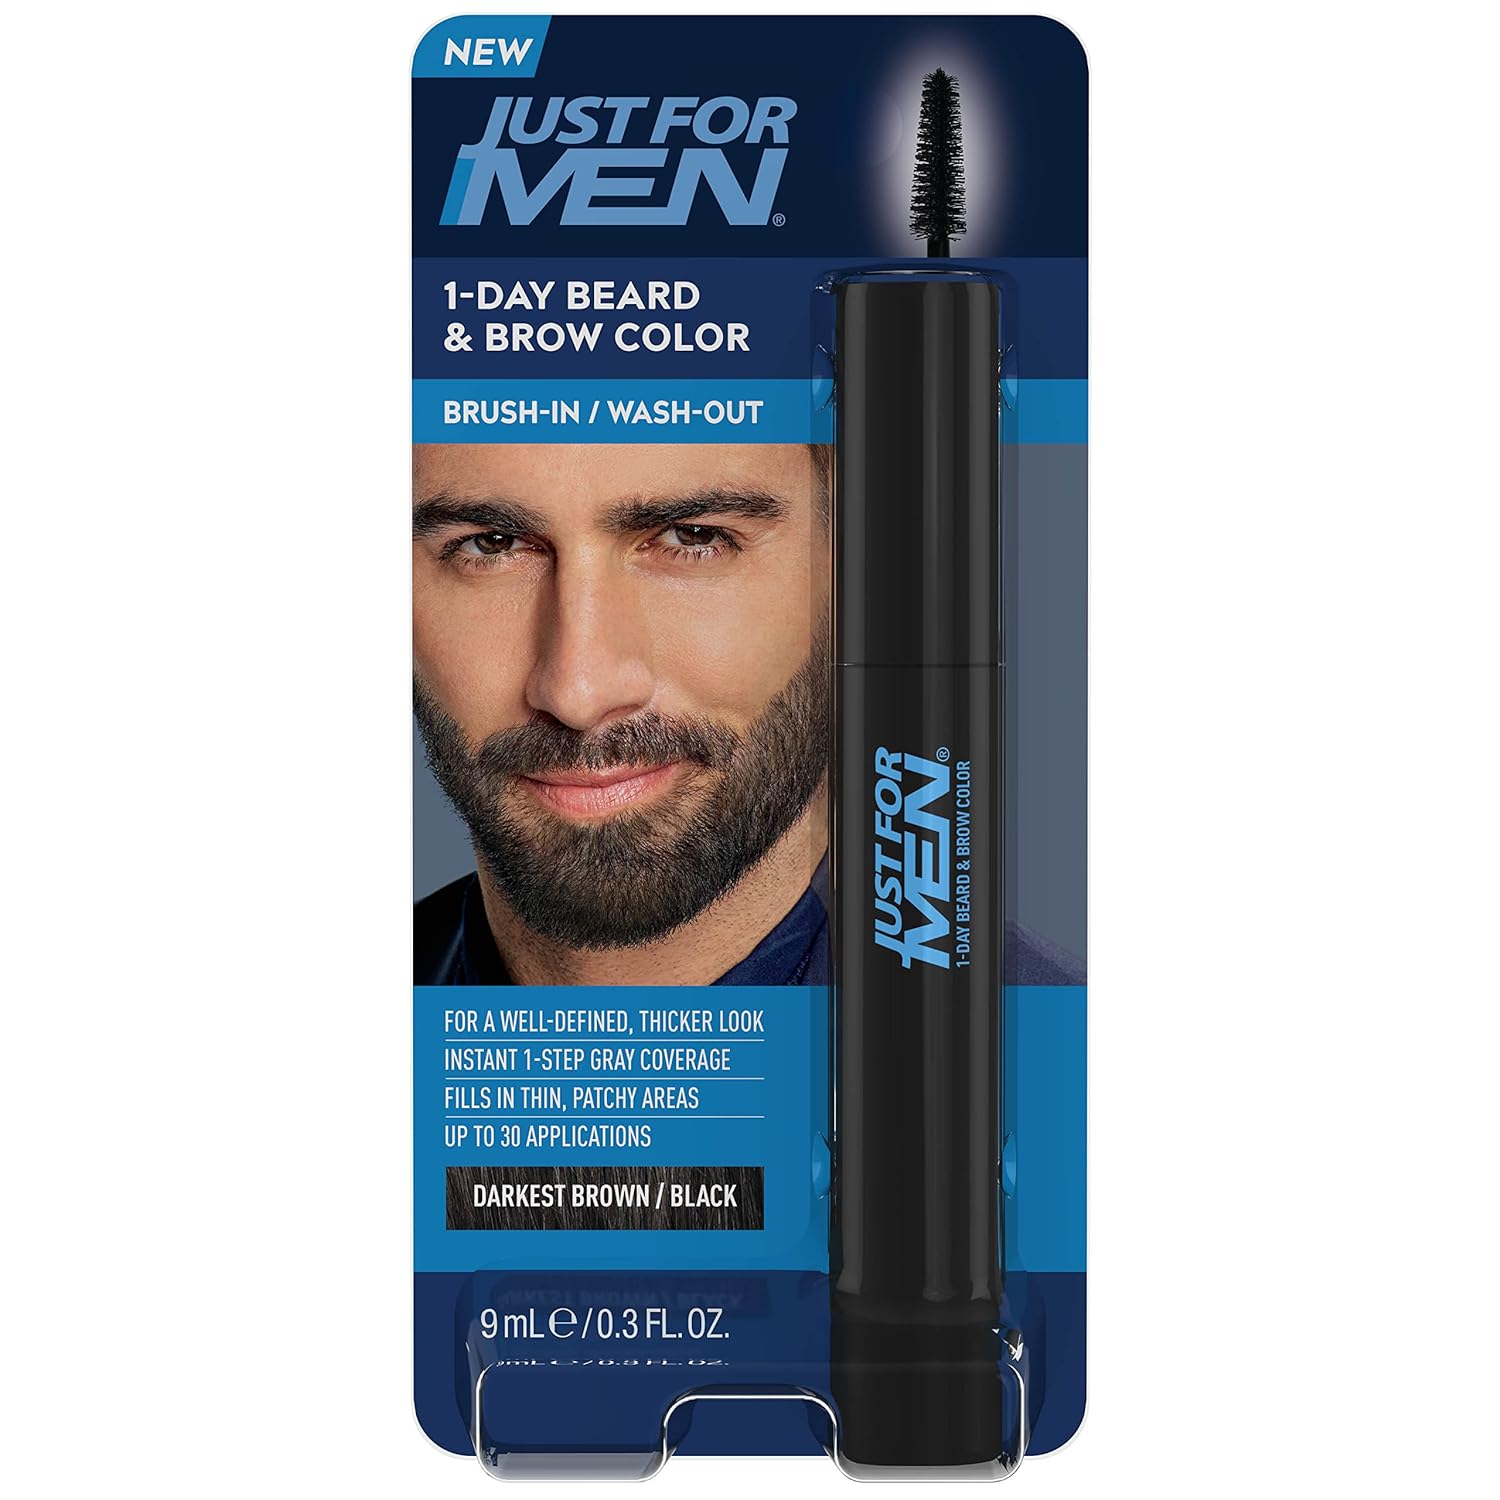 Just for Men 1-Day Beard & Brow Color, Temporary Color for Beard and Eyebrows, For a Fuller, Well-Defined Look, Up to 30 Applications, Darkest Brown/Black